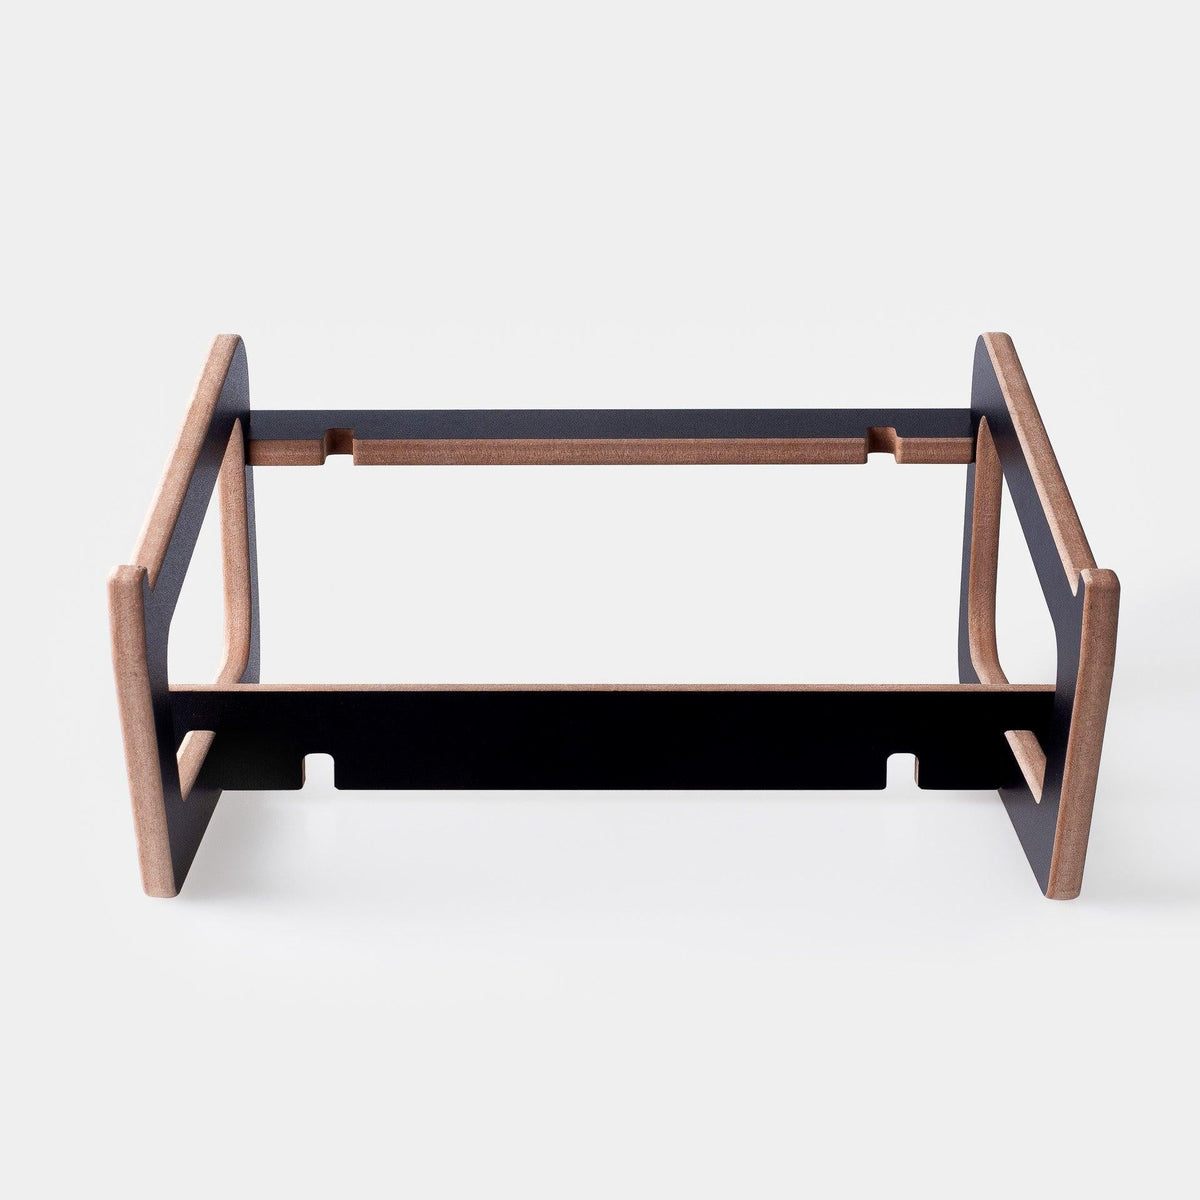 Elevated Laptop Stand - Laptop Docking Stations - e-WOOD Collection - ewoodcollection.com